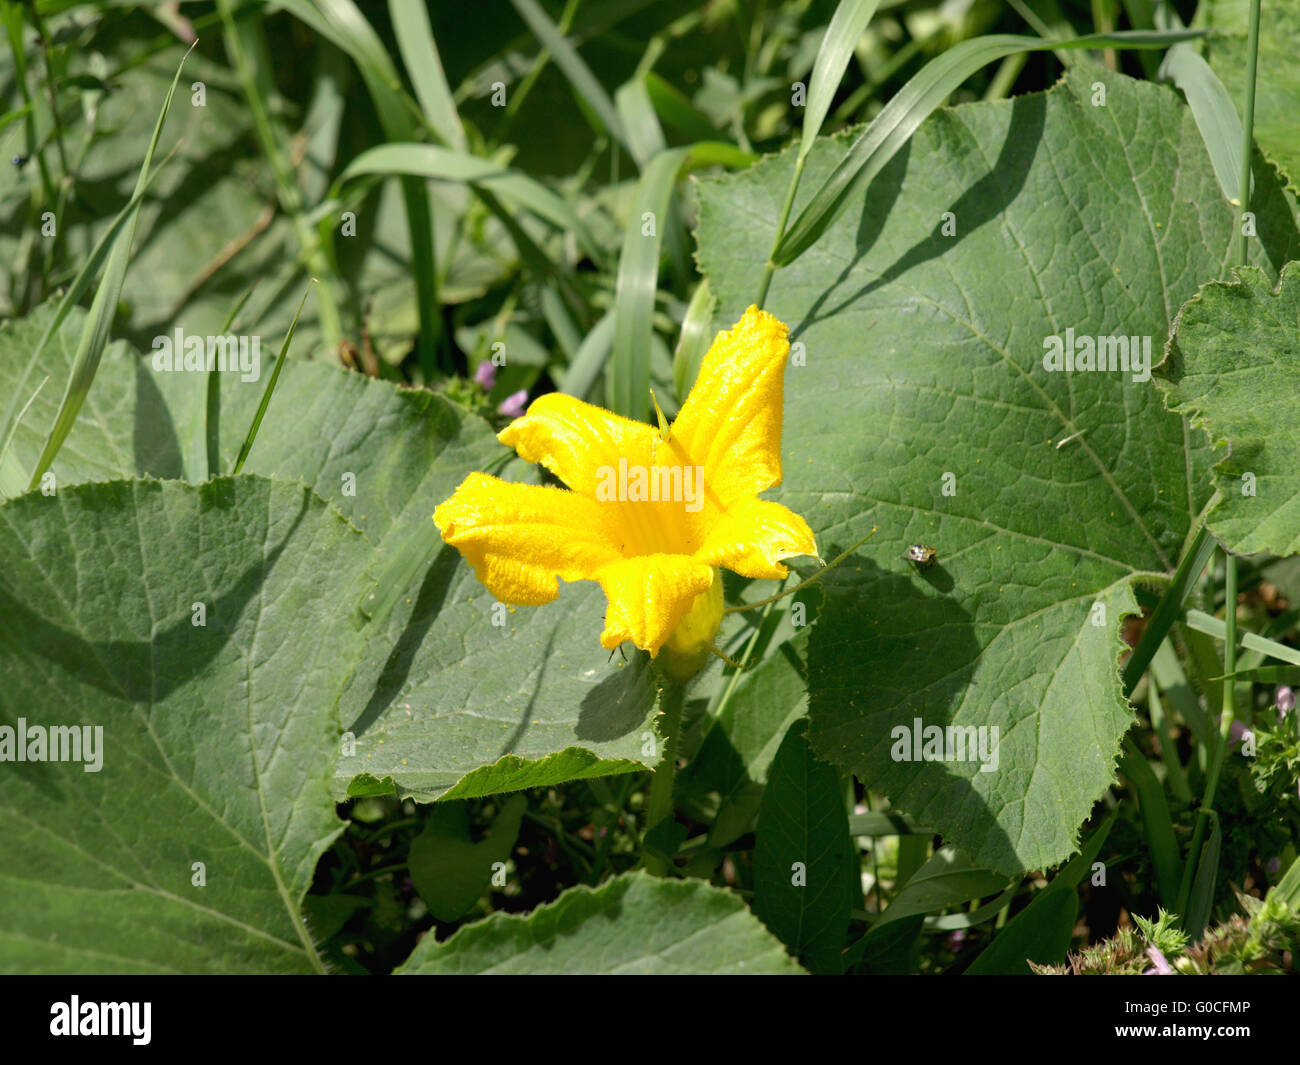 Pumpkin with yellow flowers growing in the field Stock Photo